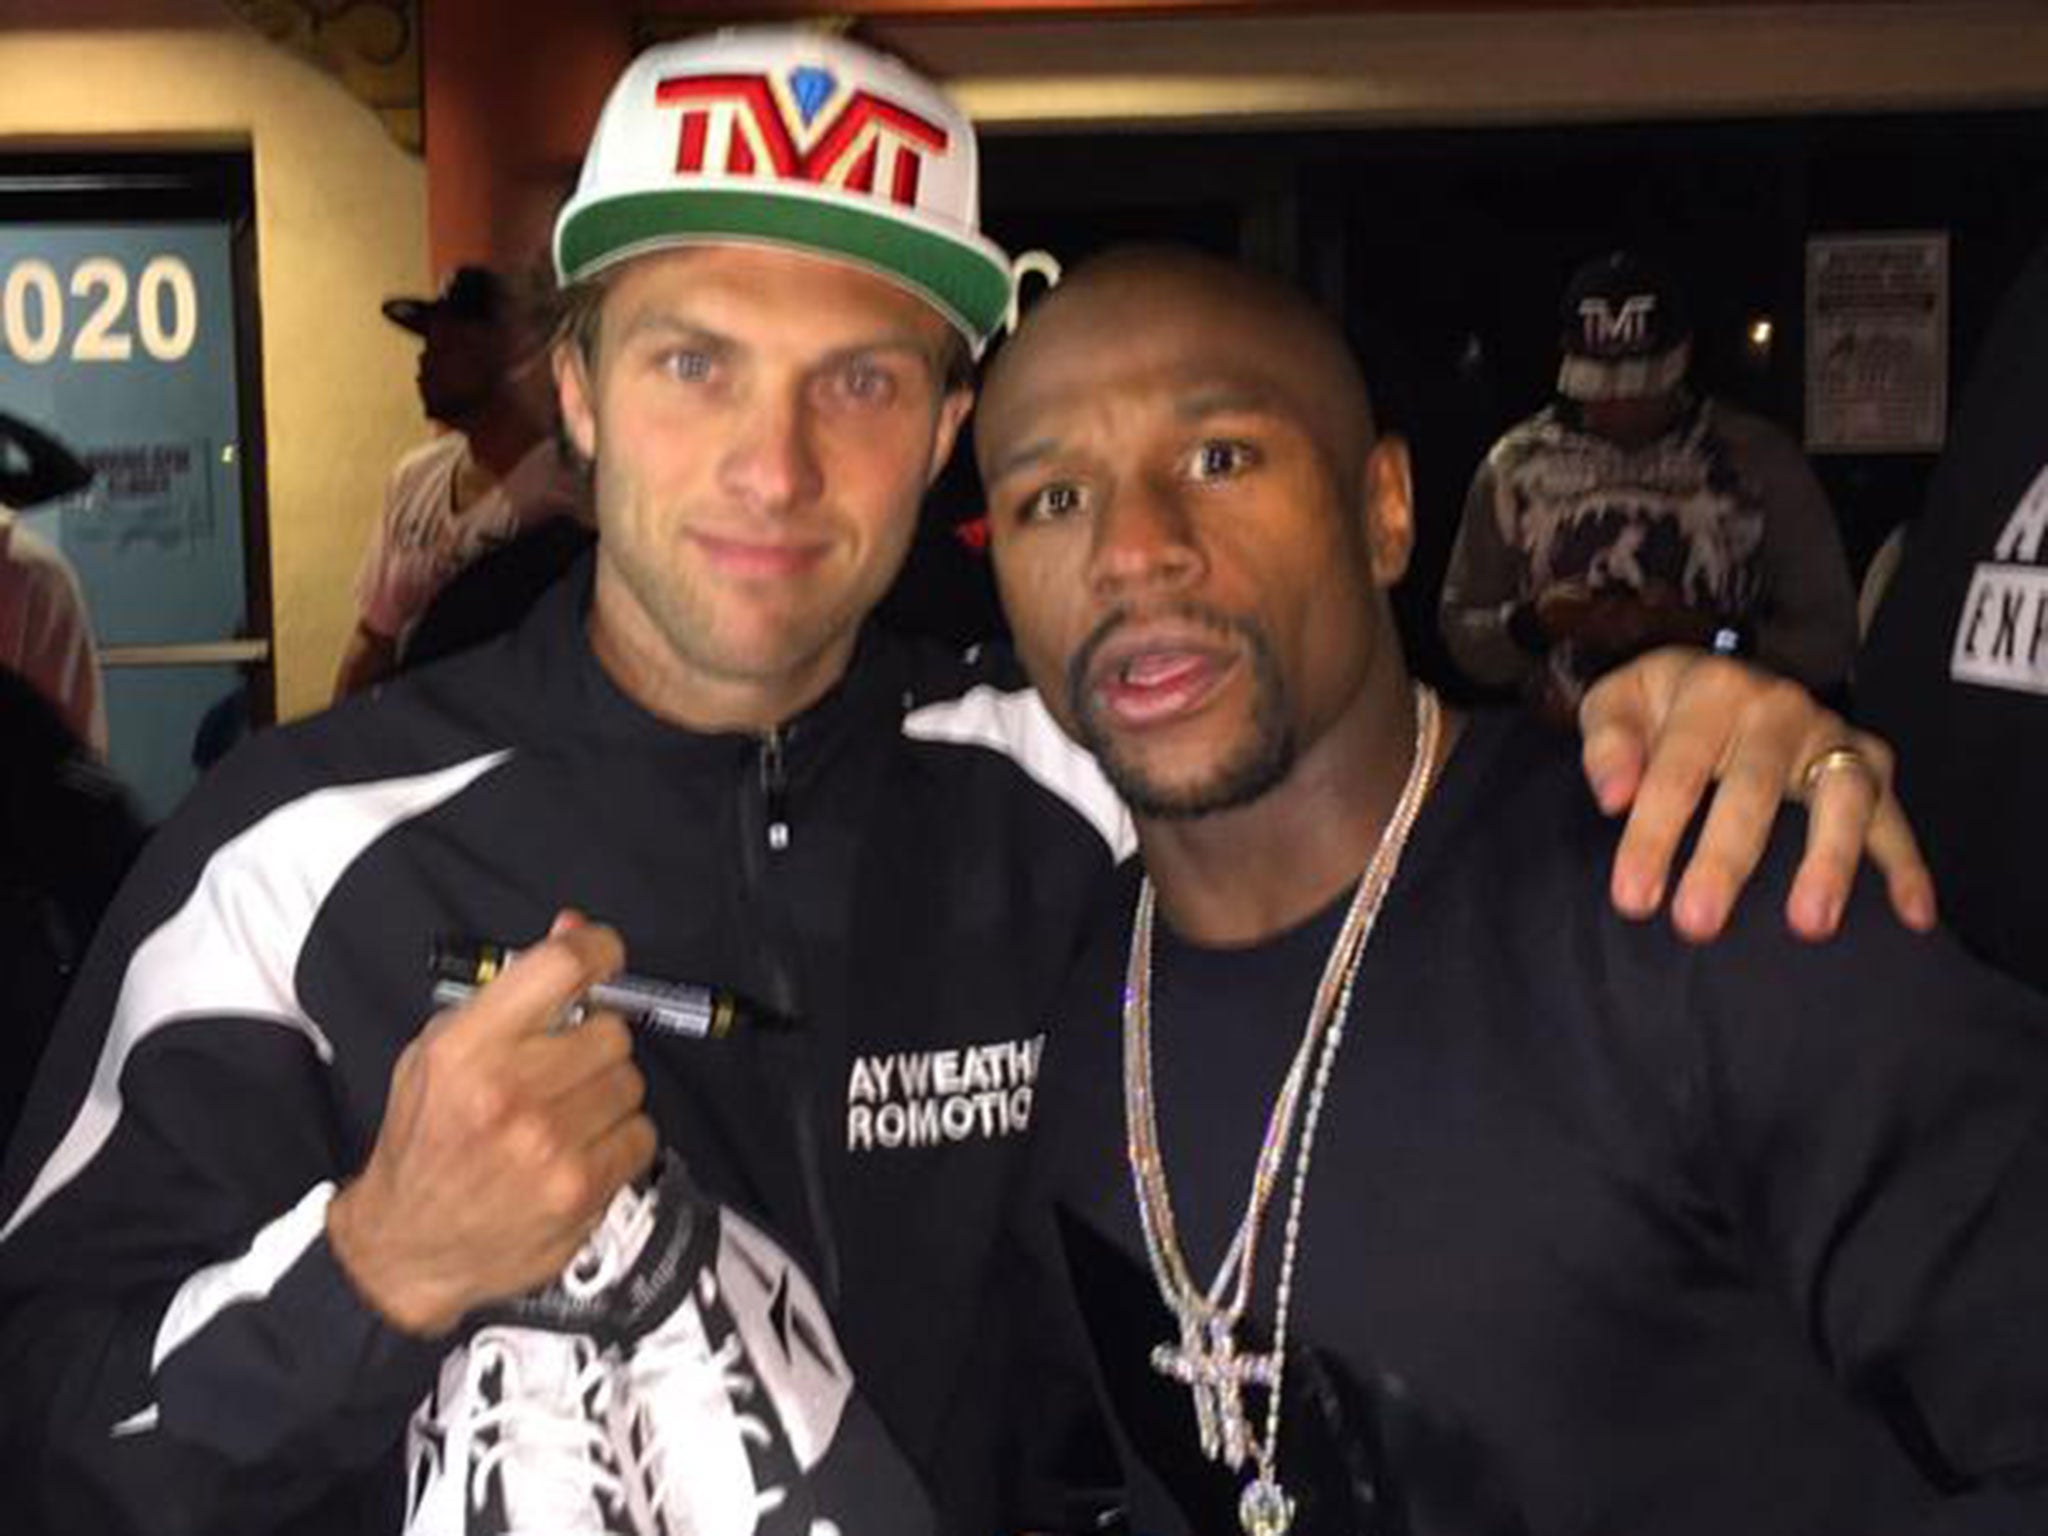 Chris Stowe (left) managed to blag his way in Floyd Mayweather's entourage